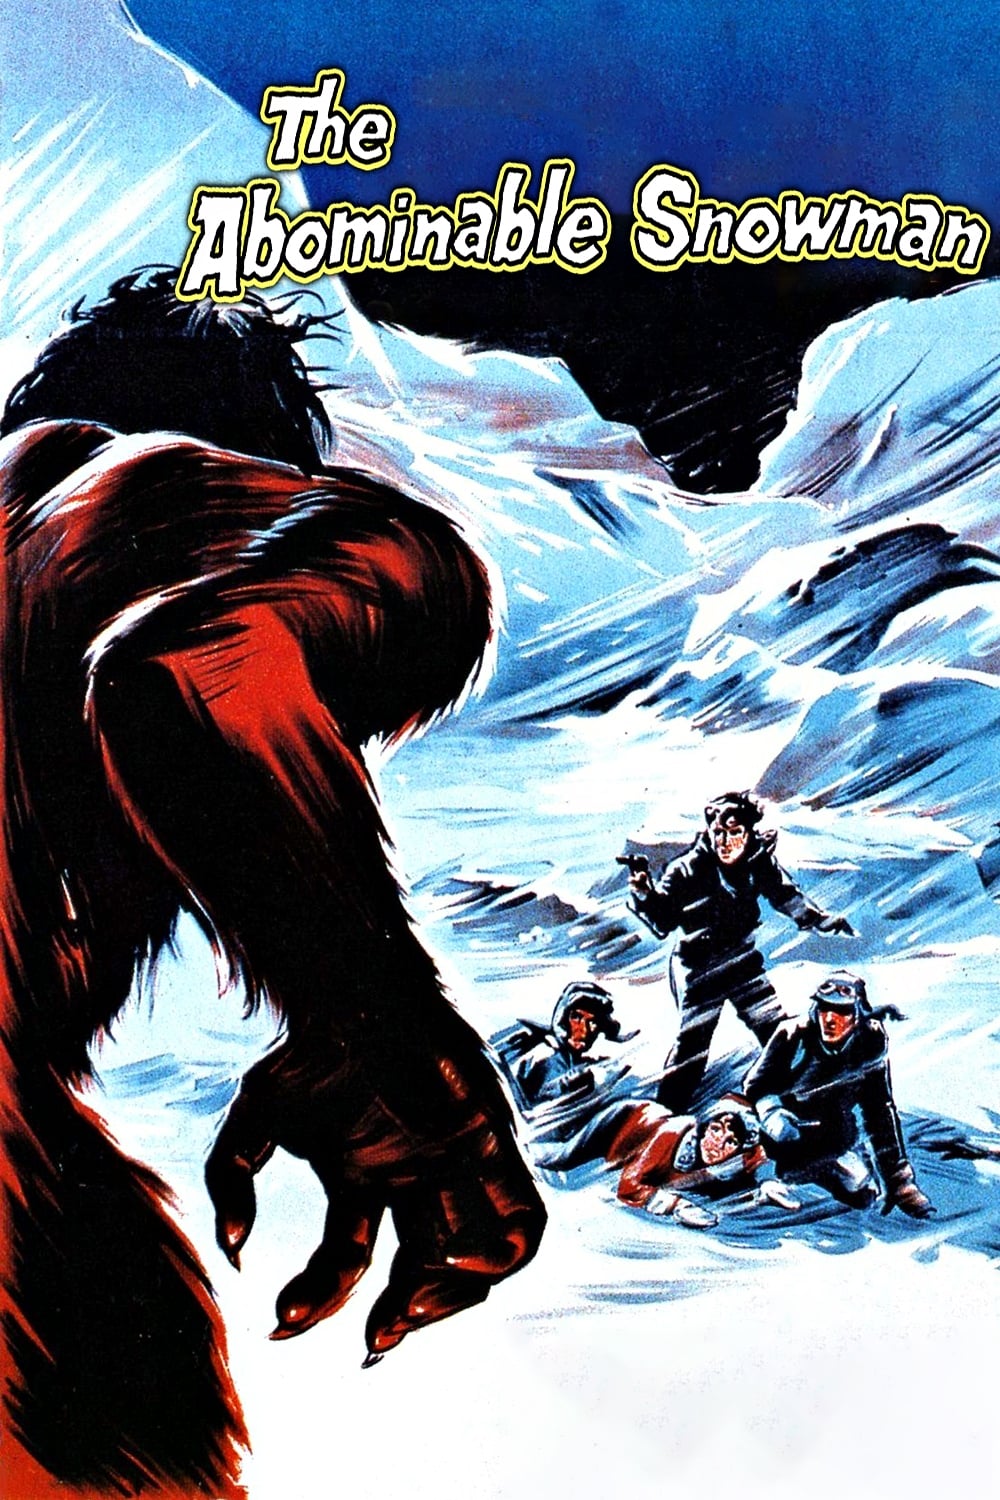 The Abominable Snowman (1957)